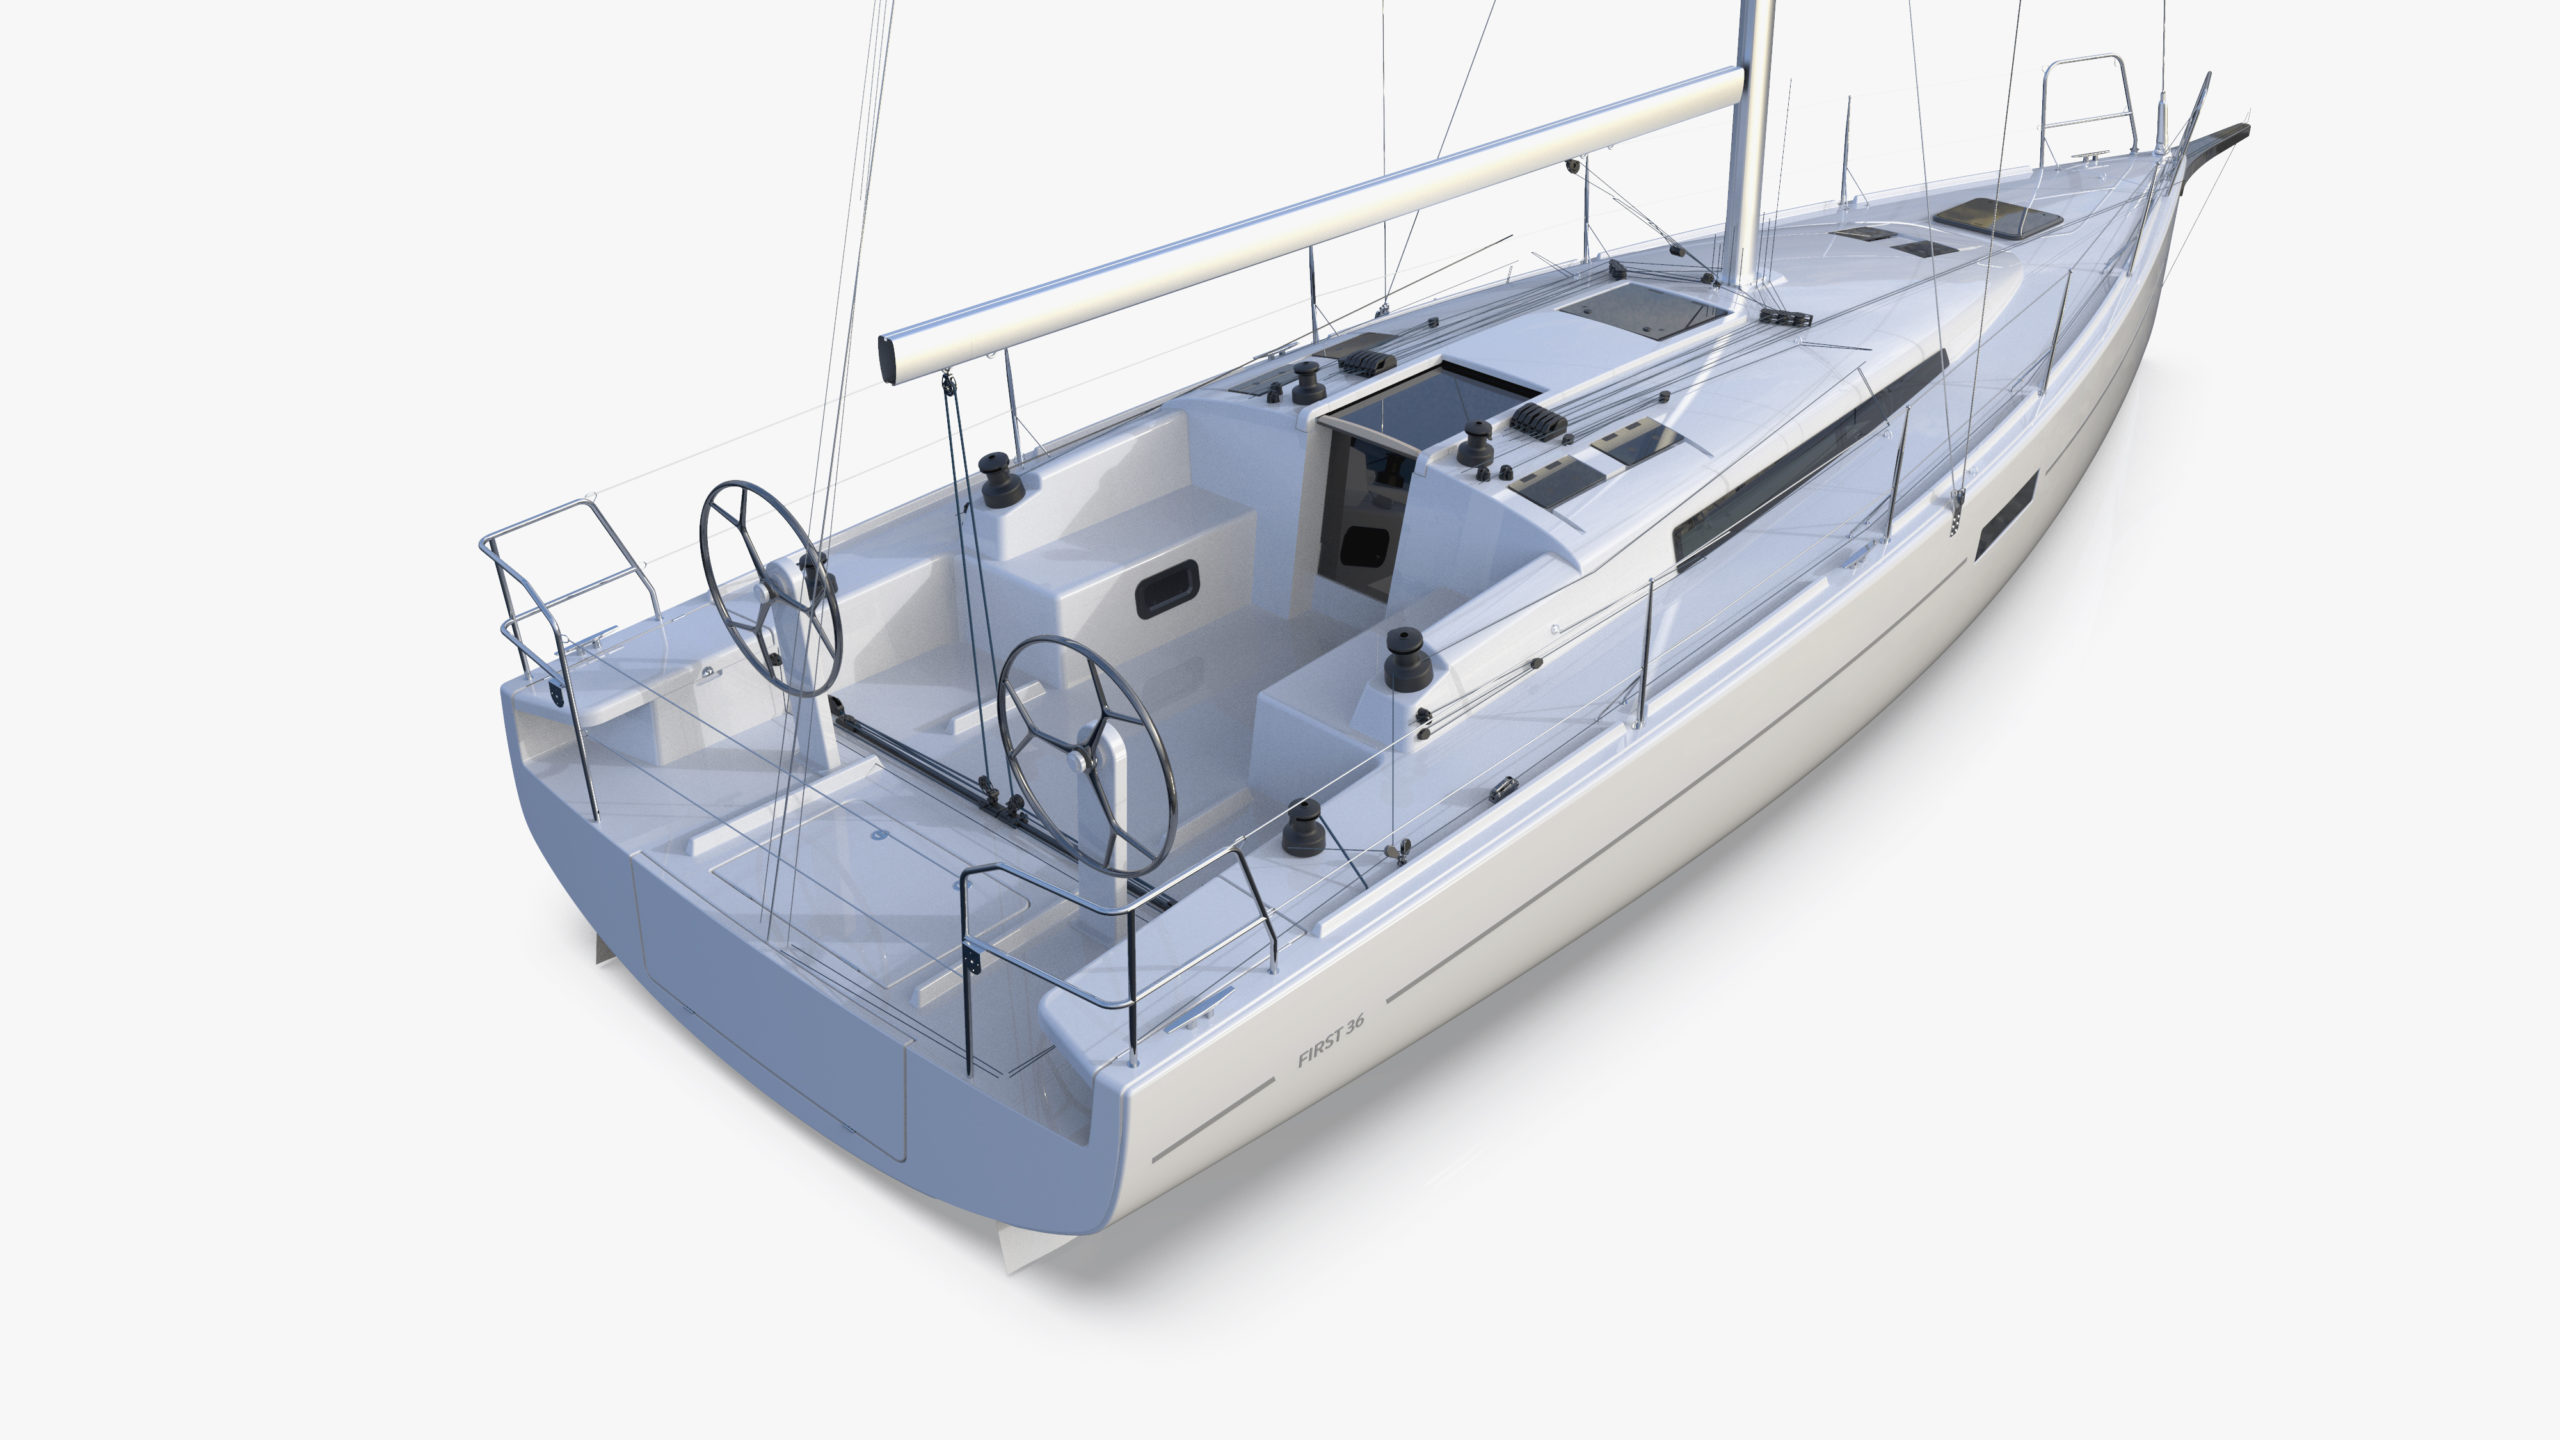 Beneteau FIRST 36 stb cockpit drawing